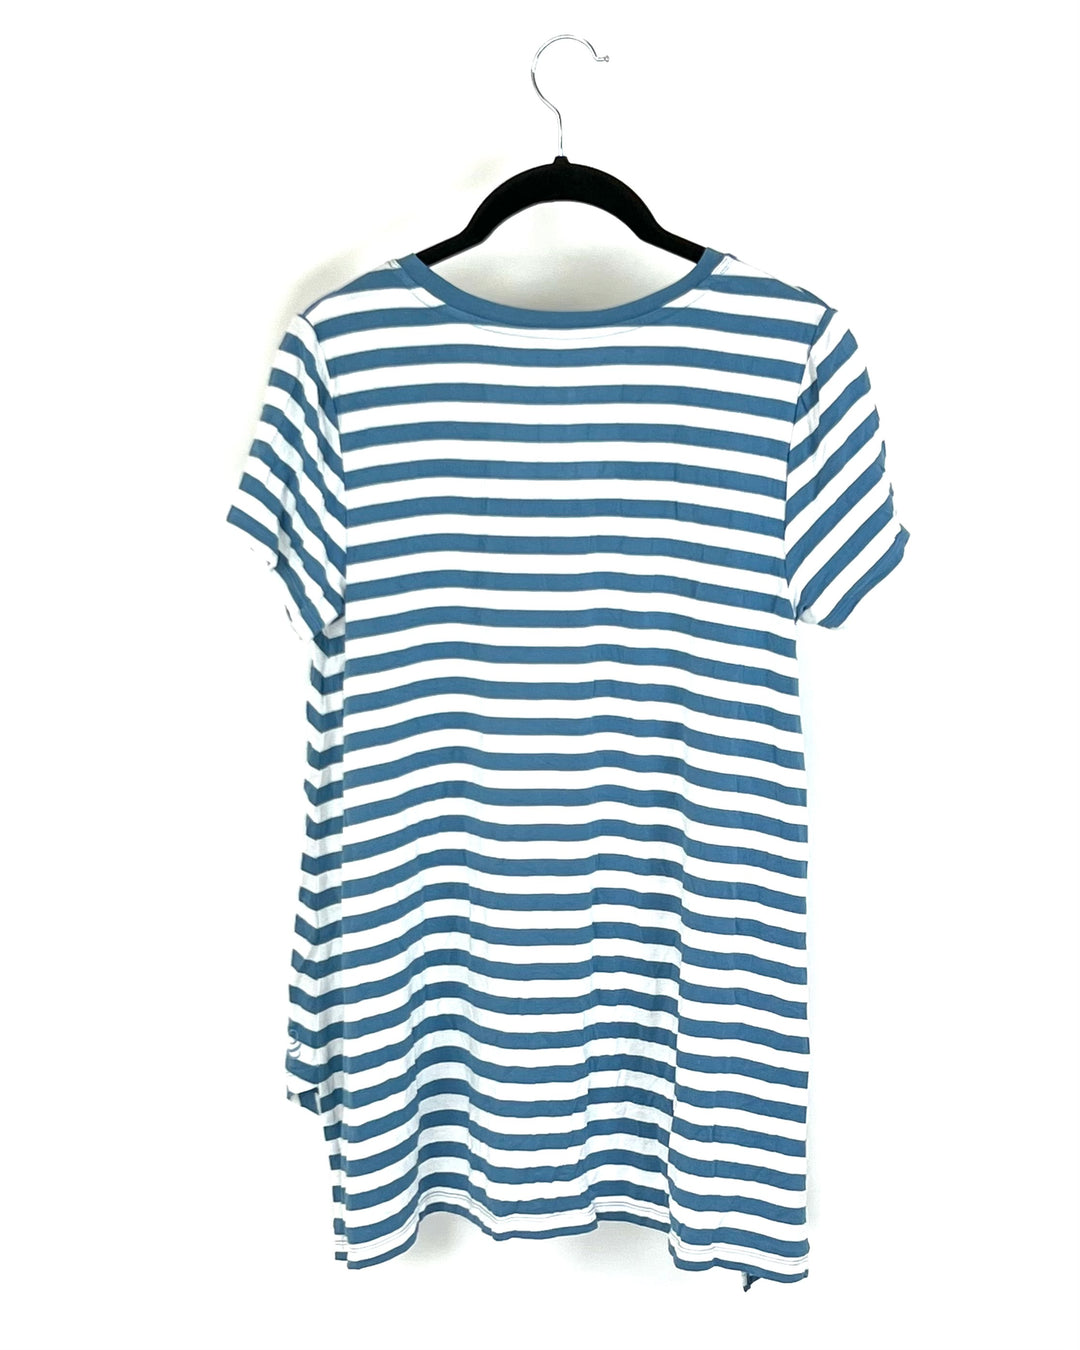 White and Blue Striped Short Sleeve Top - Size 4/6